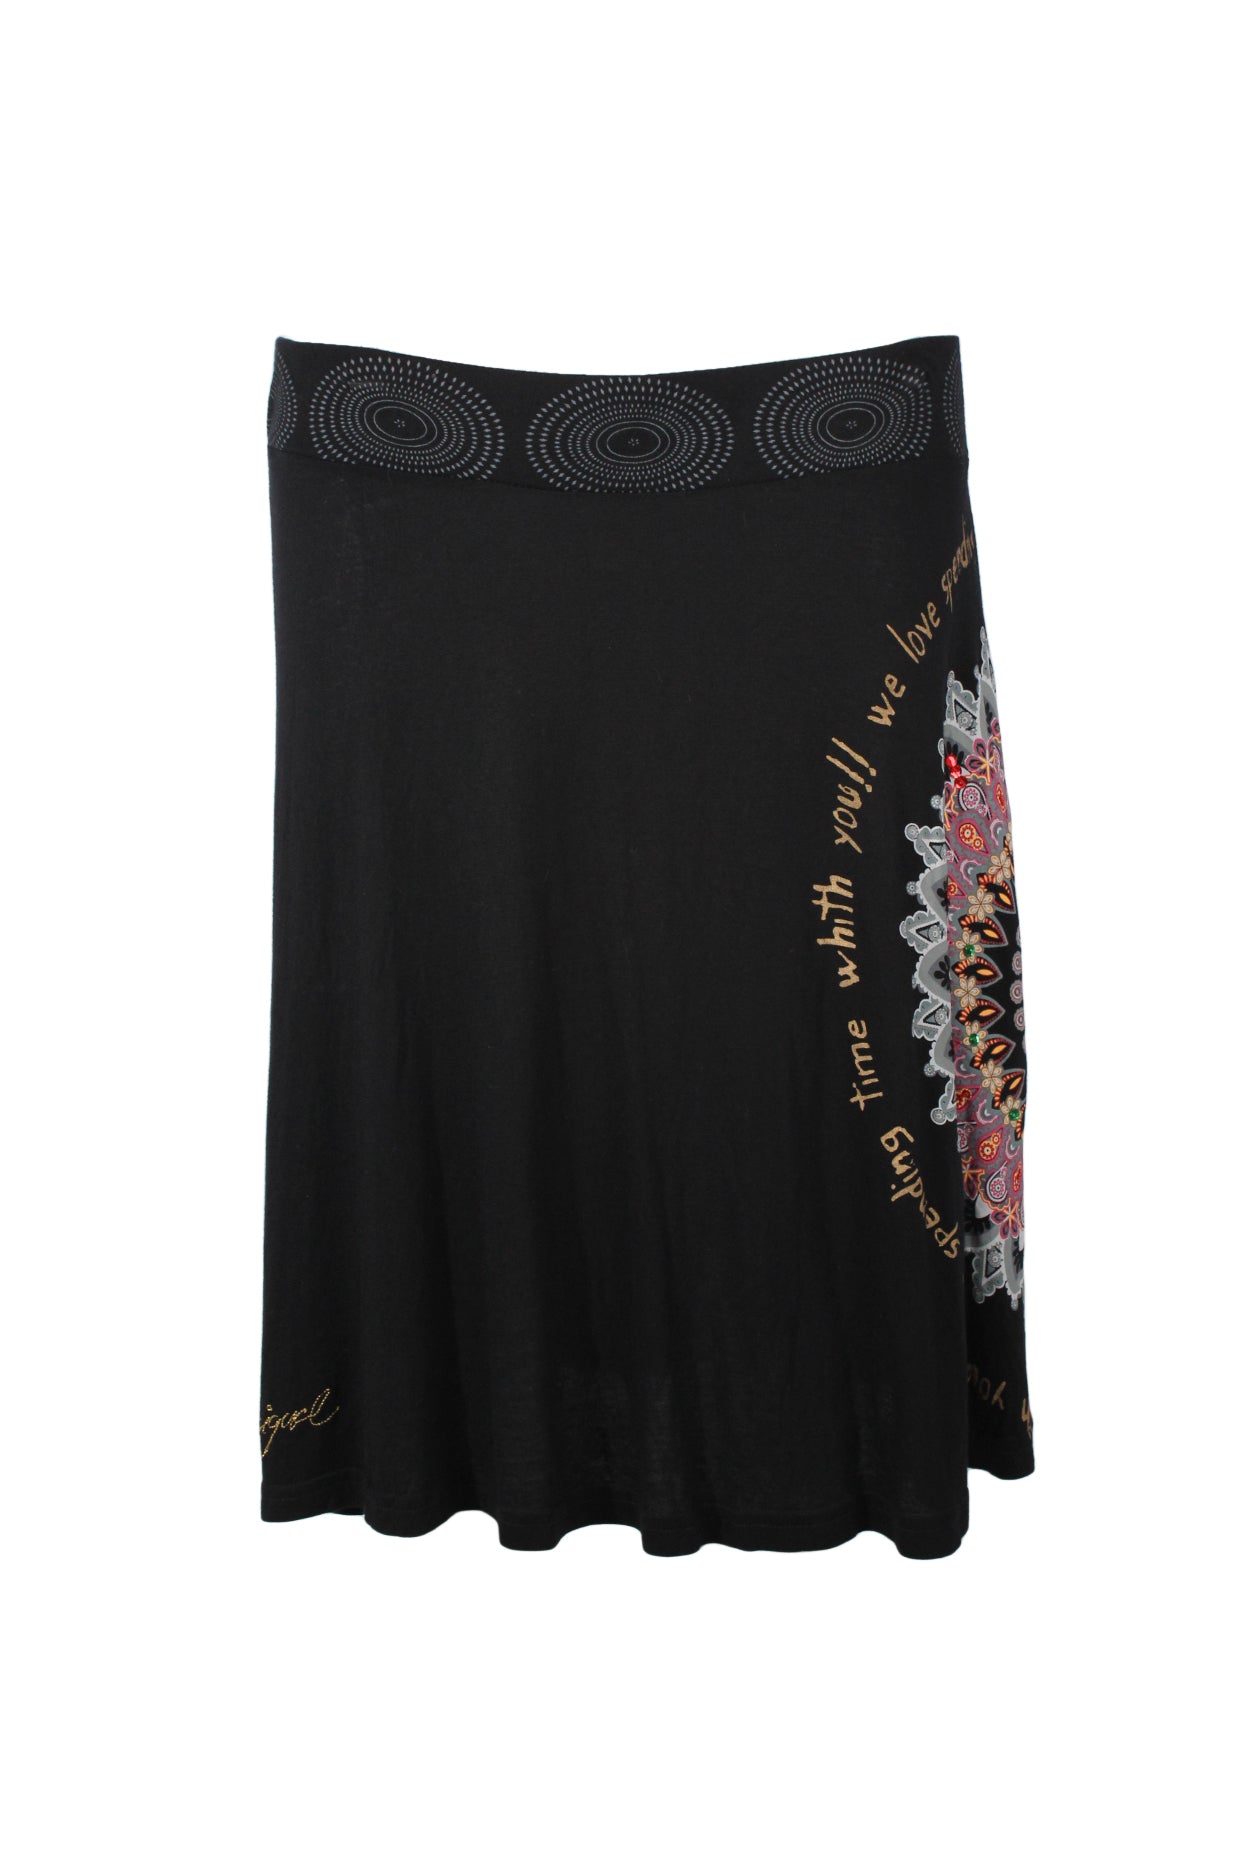 front angle vintage y2k black/multicolor knit skirt featuring gold 'desigual' embroidery at lower front right, mandala design at front left with green/red sequins detail & semi-circular 'we love spending time with you!!' gold text, and elastic waistband with gray geometric pattern at front.